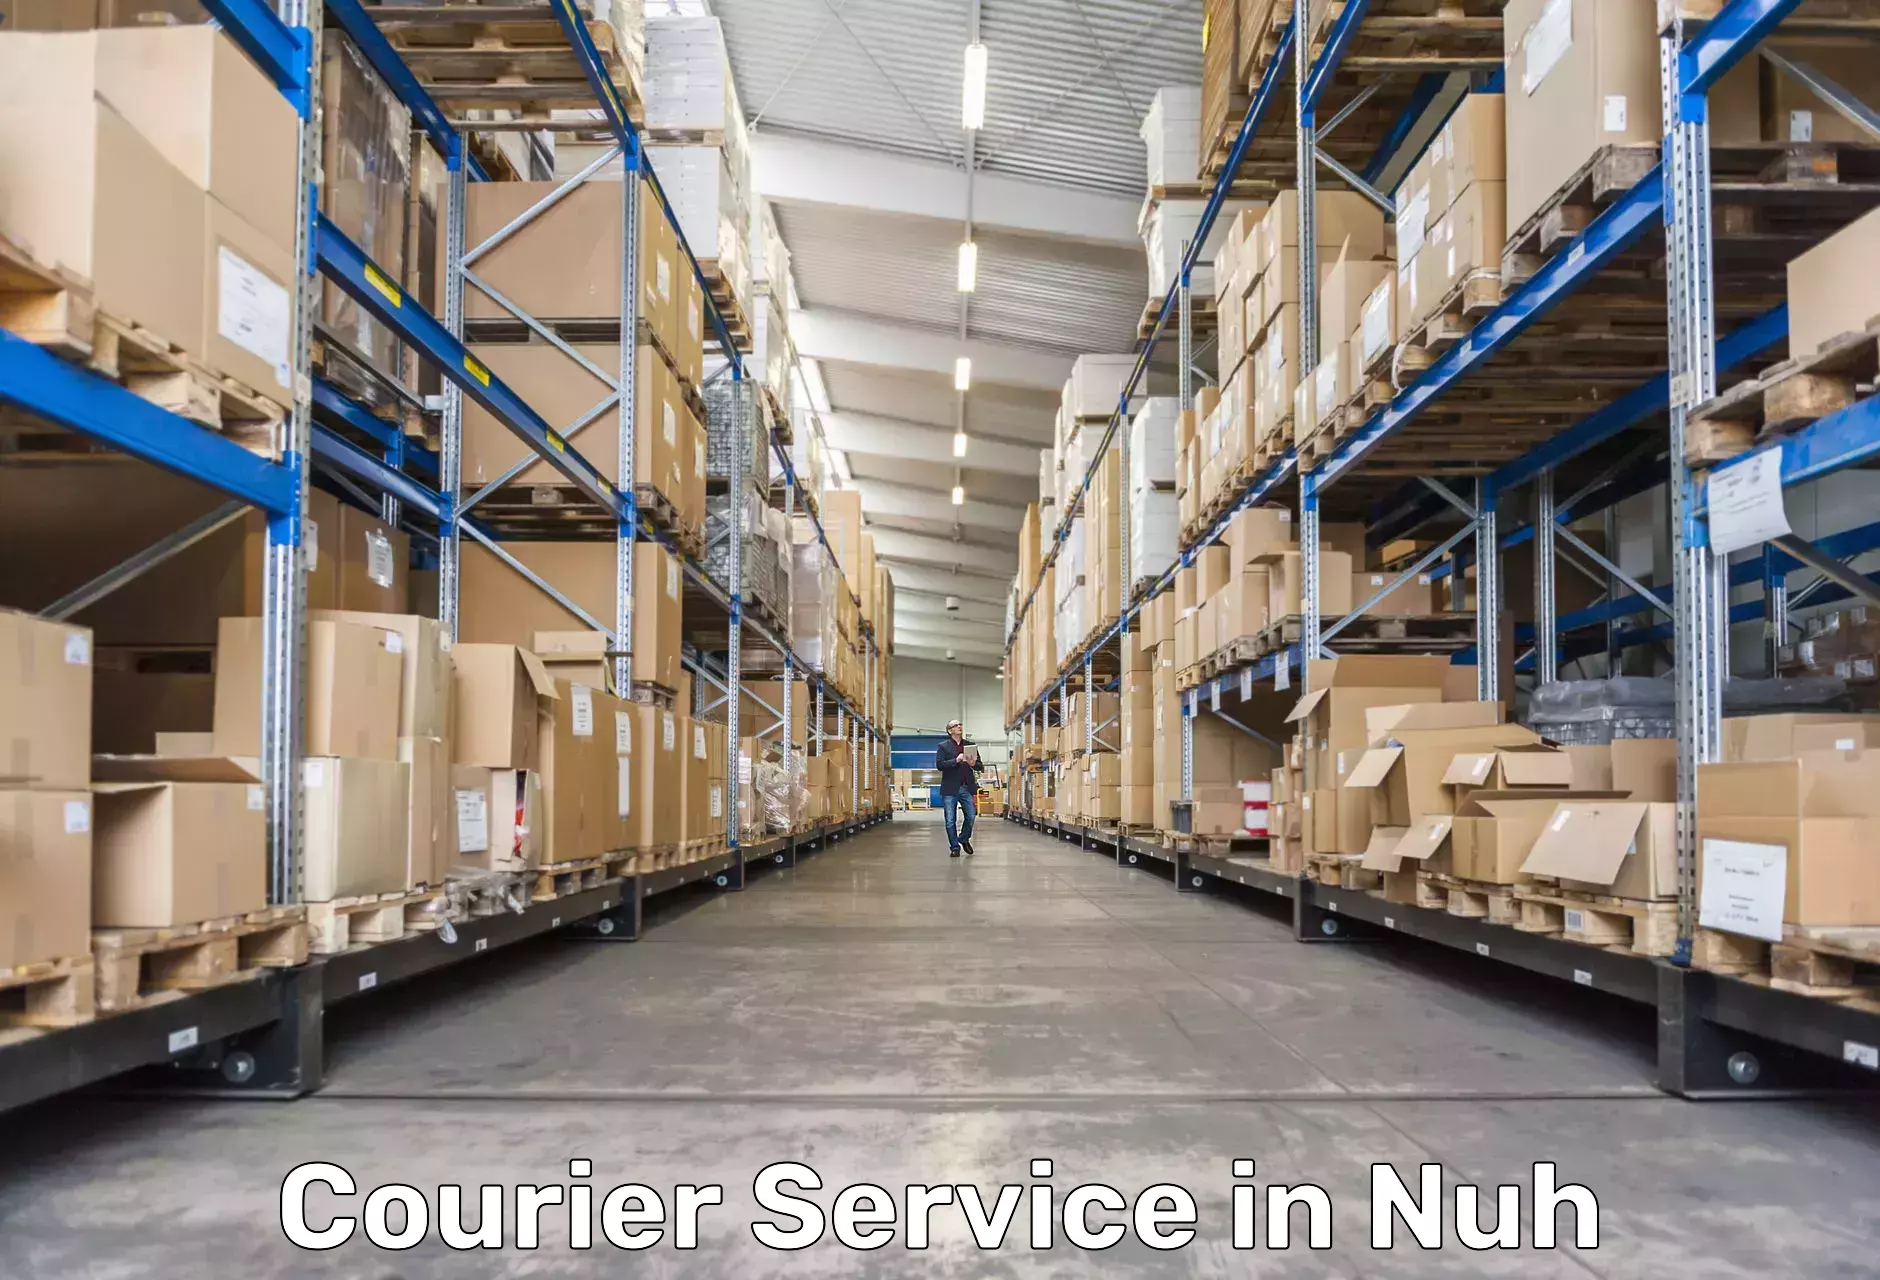 24-hour courier service in Nuh